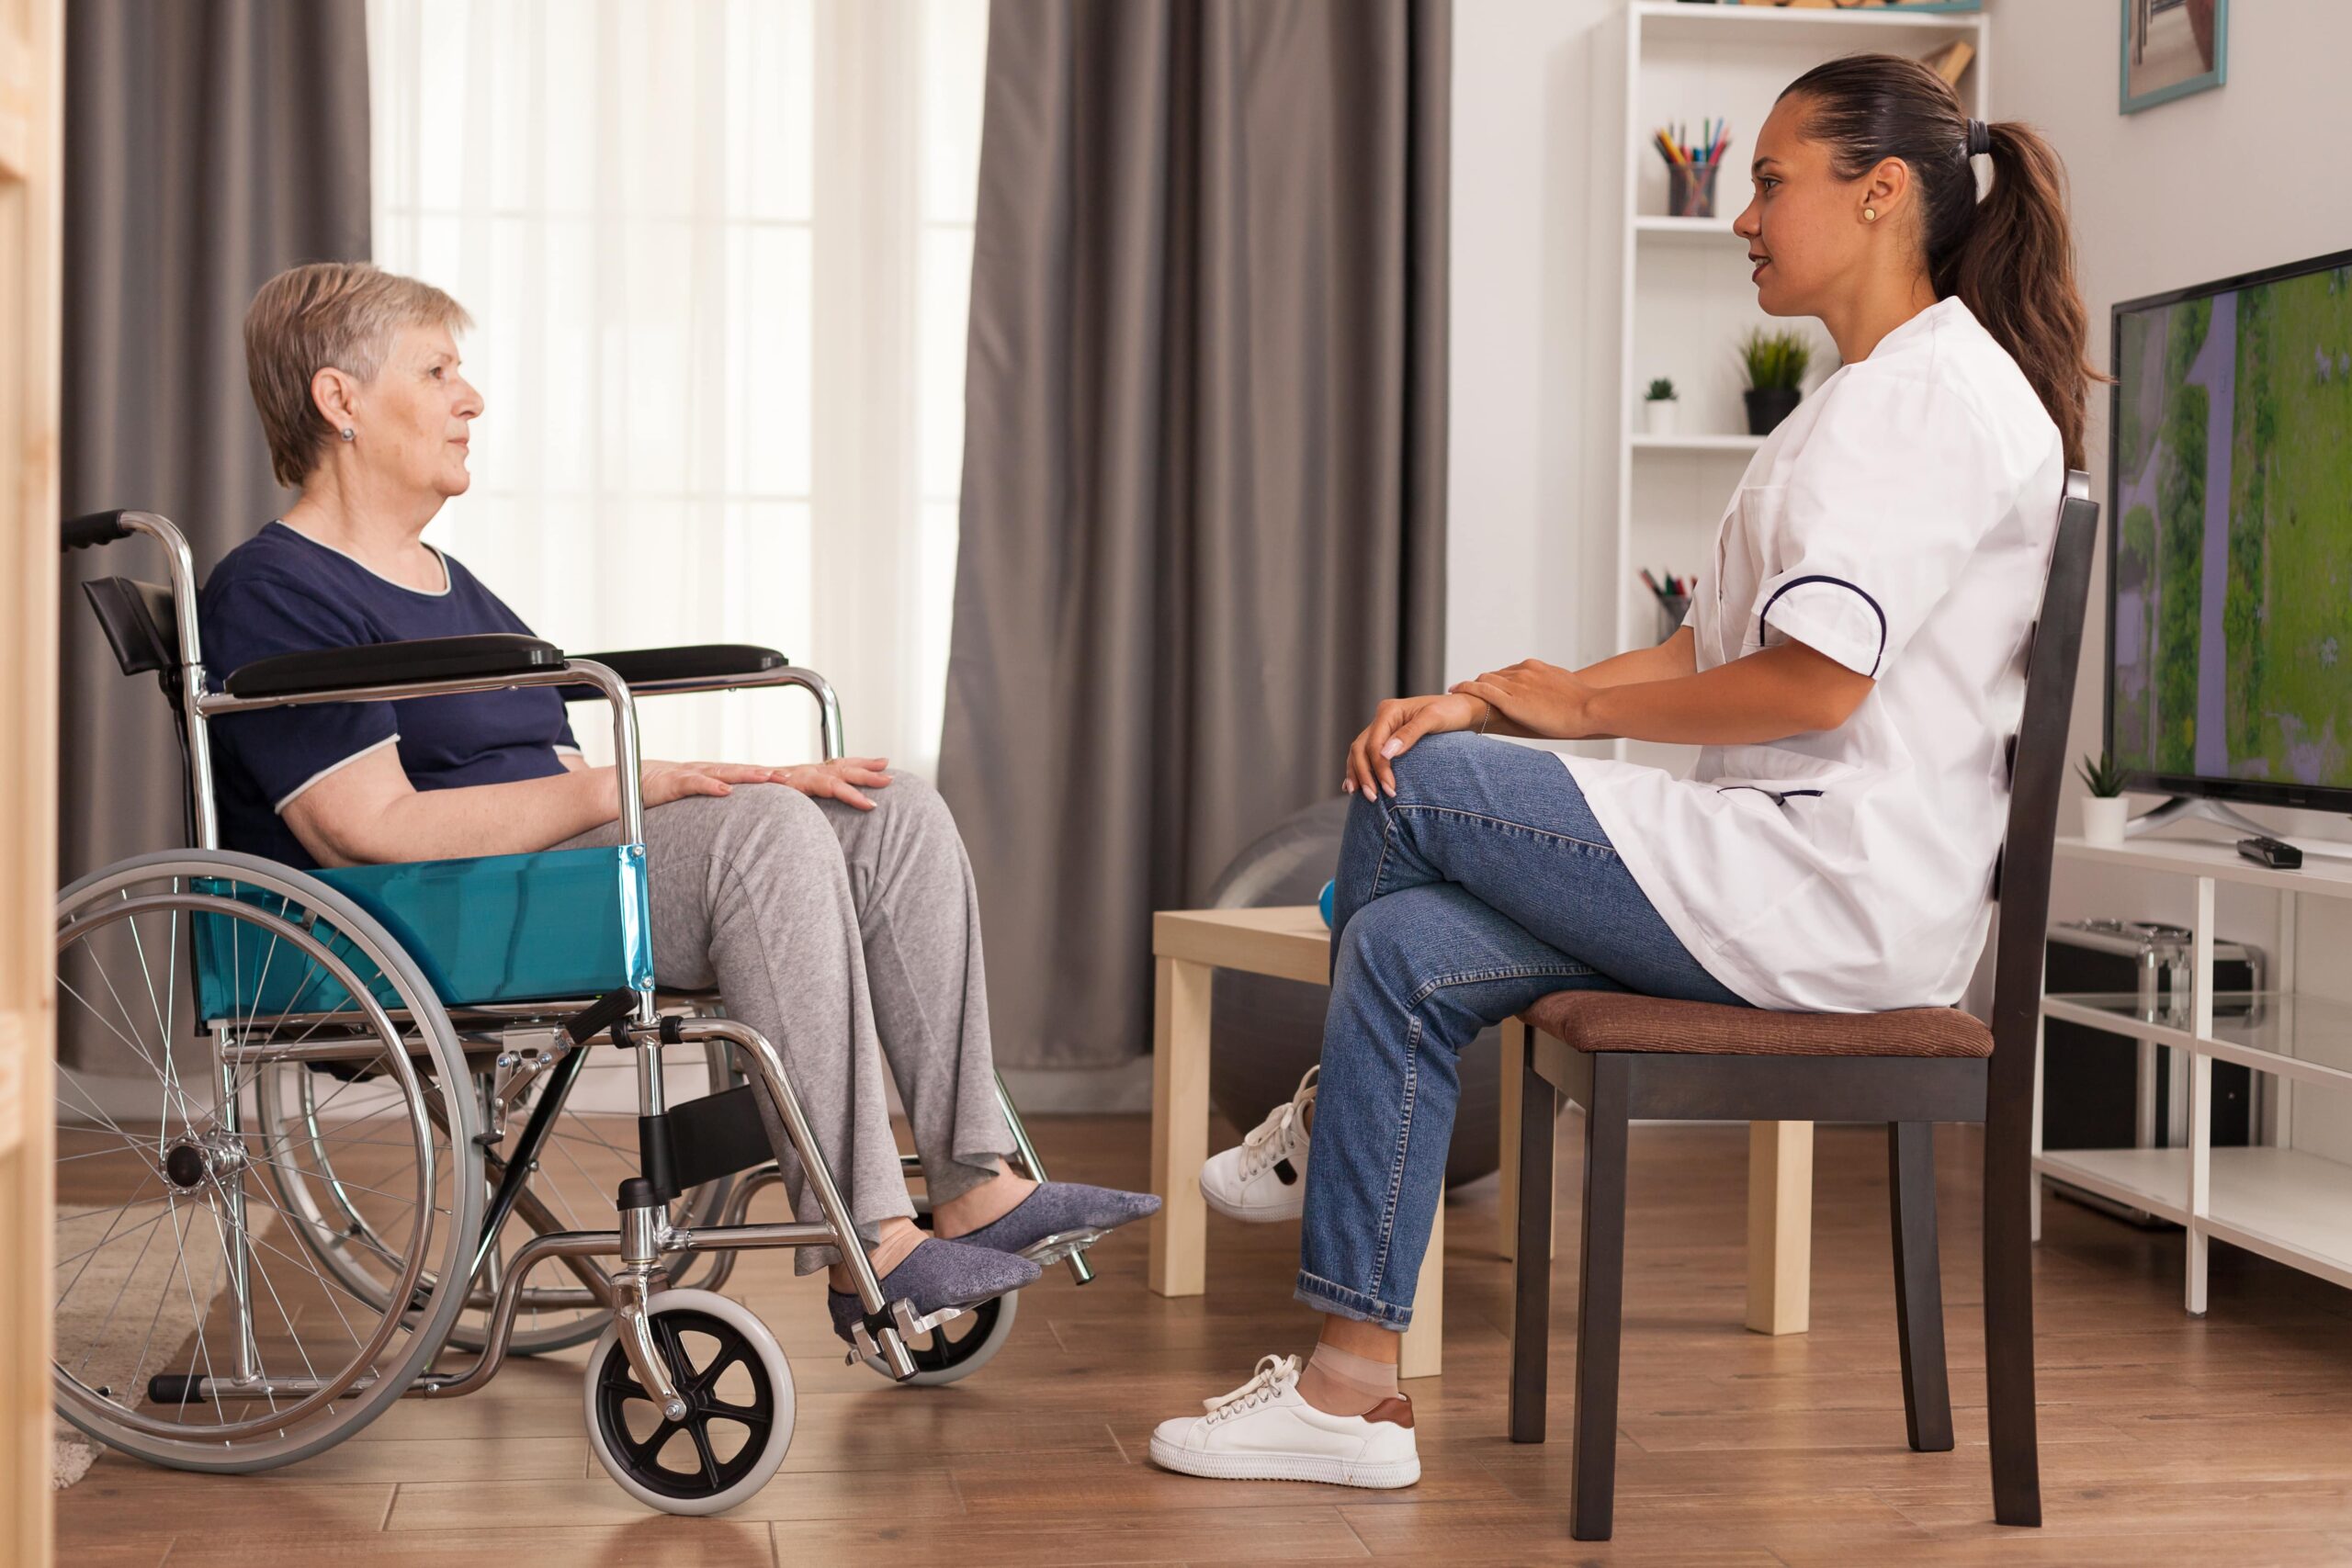 Caregiver talking with a disabled woman sitting on the wheelchair